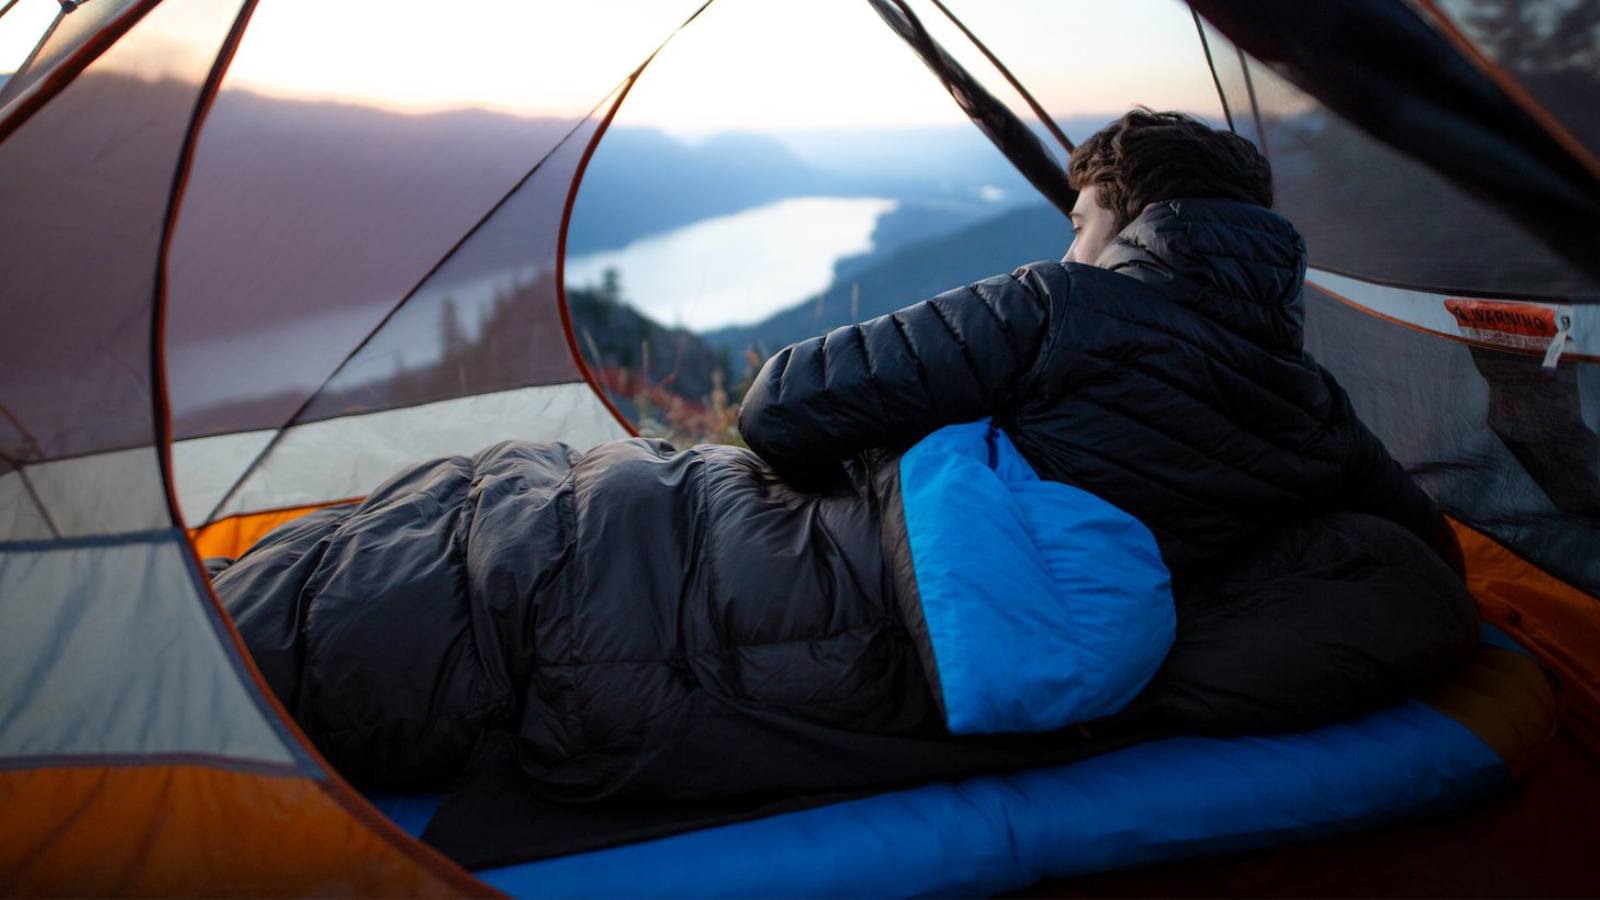 When paired together, the Zenbivy Bed quilt and sheet create a complete sleeping "bag" that's just as light and warm as any mummy bag, but offers far more versatility, comfort, and space to move around at night.